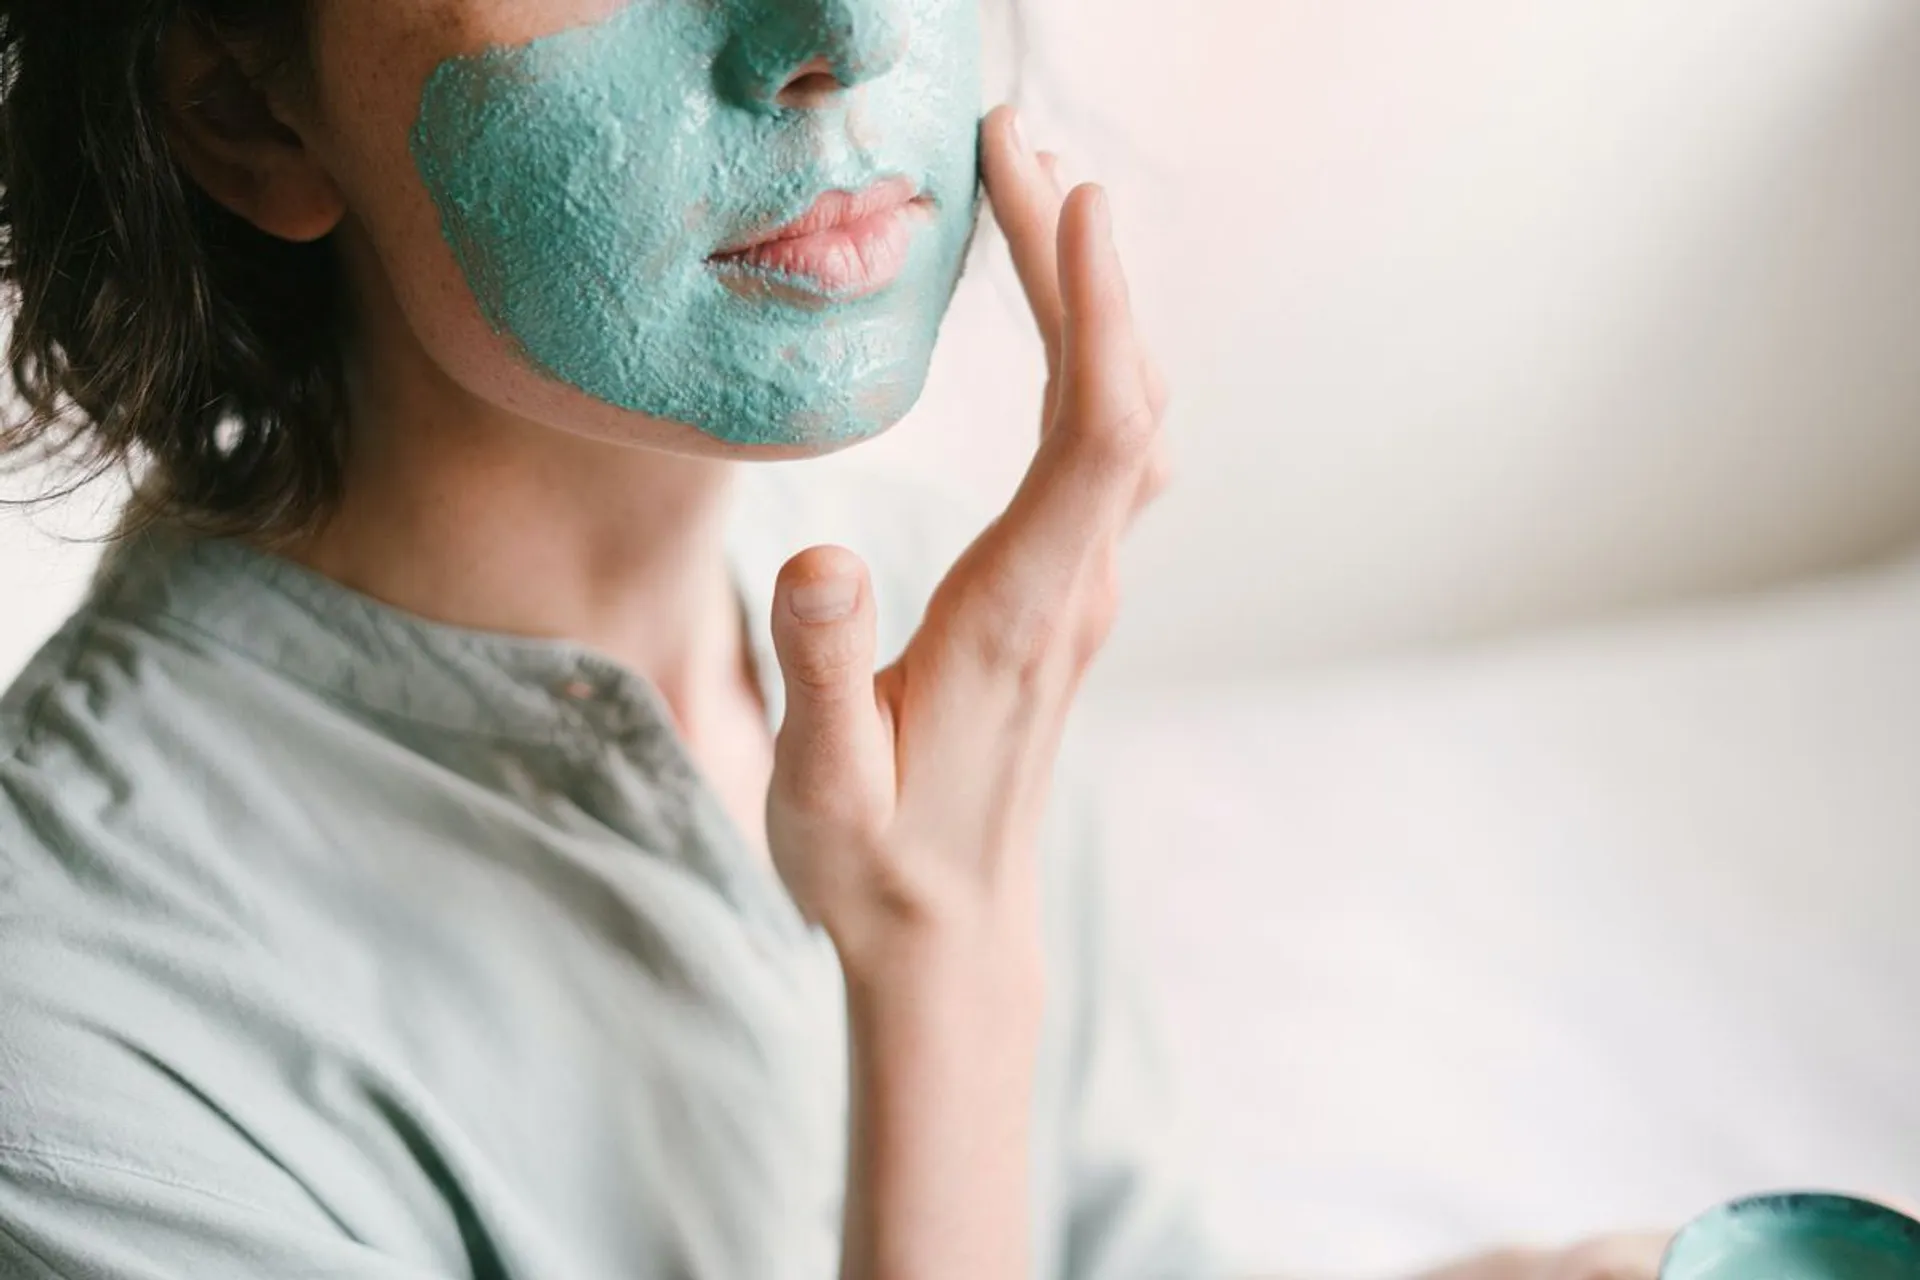 Affordable ways to improve your beauty routine